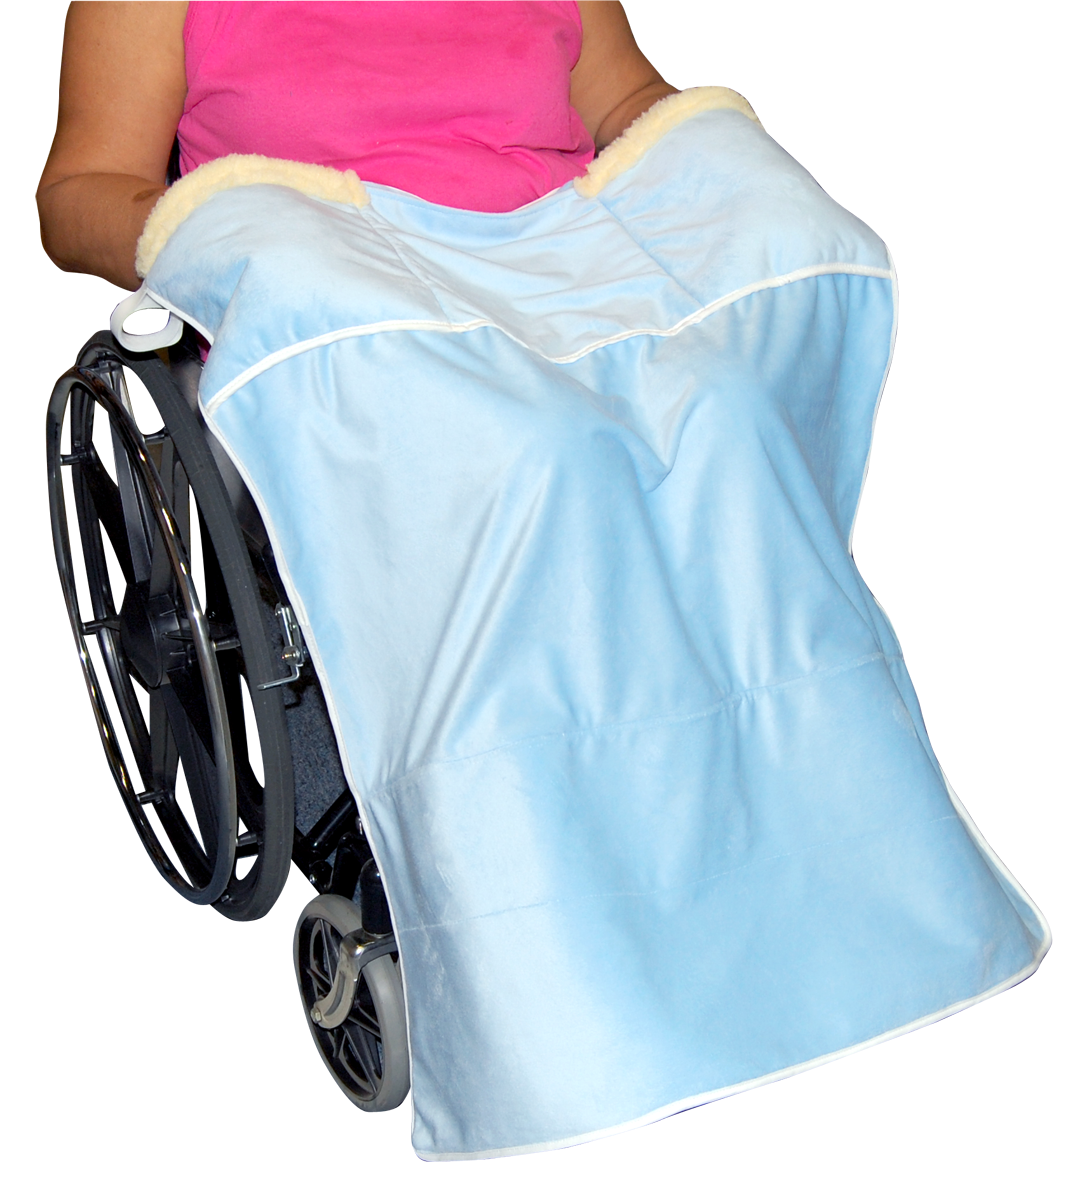 914761 Lap Blanket With Hand Warmer - Universal